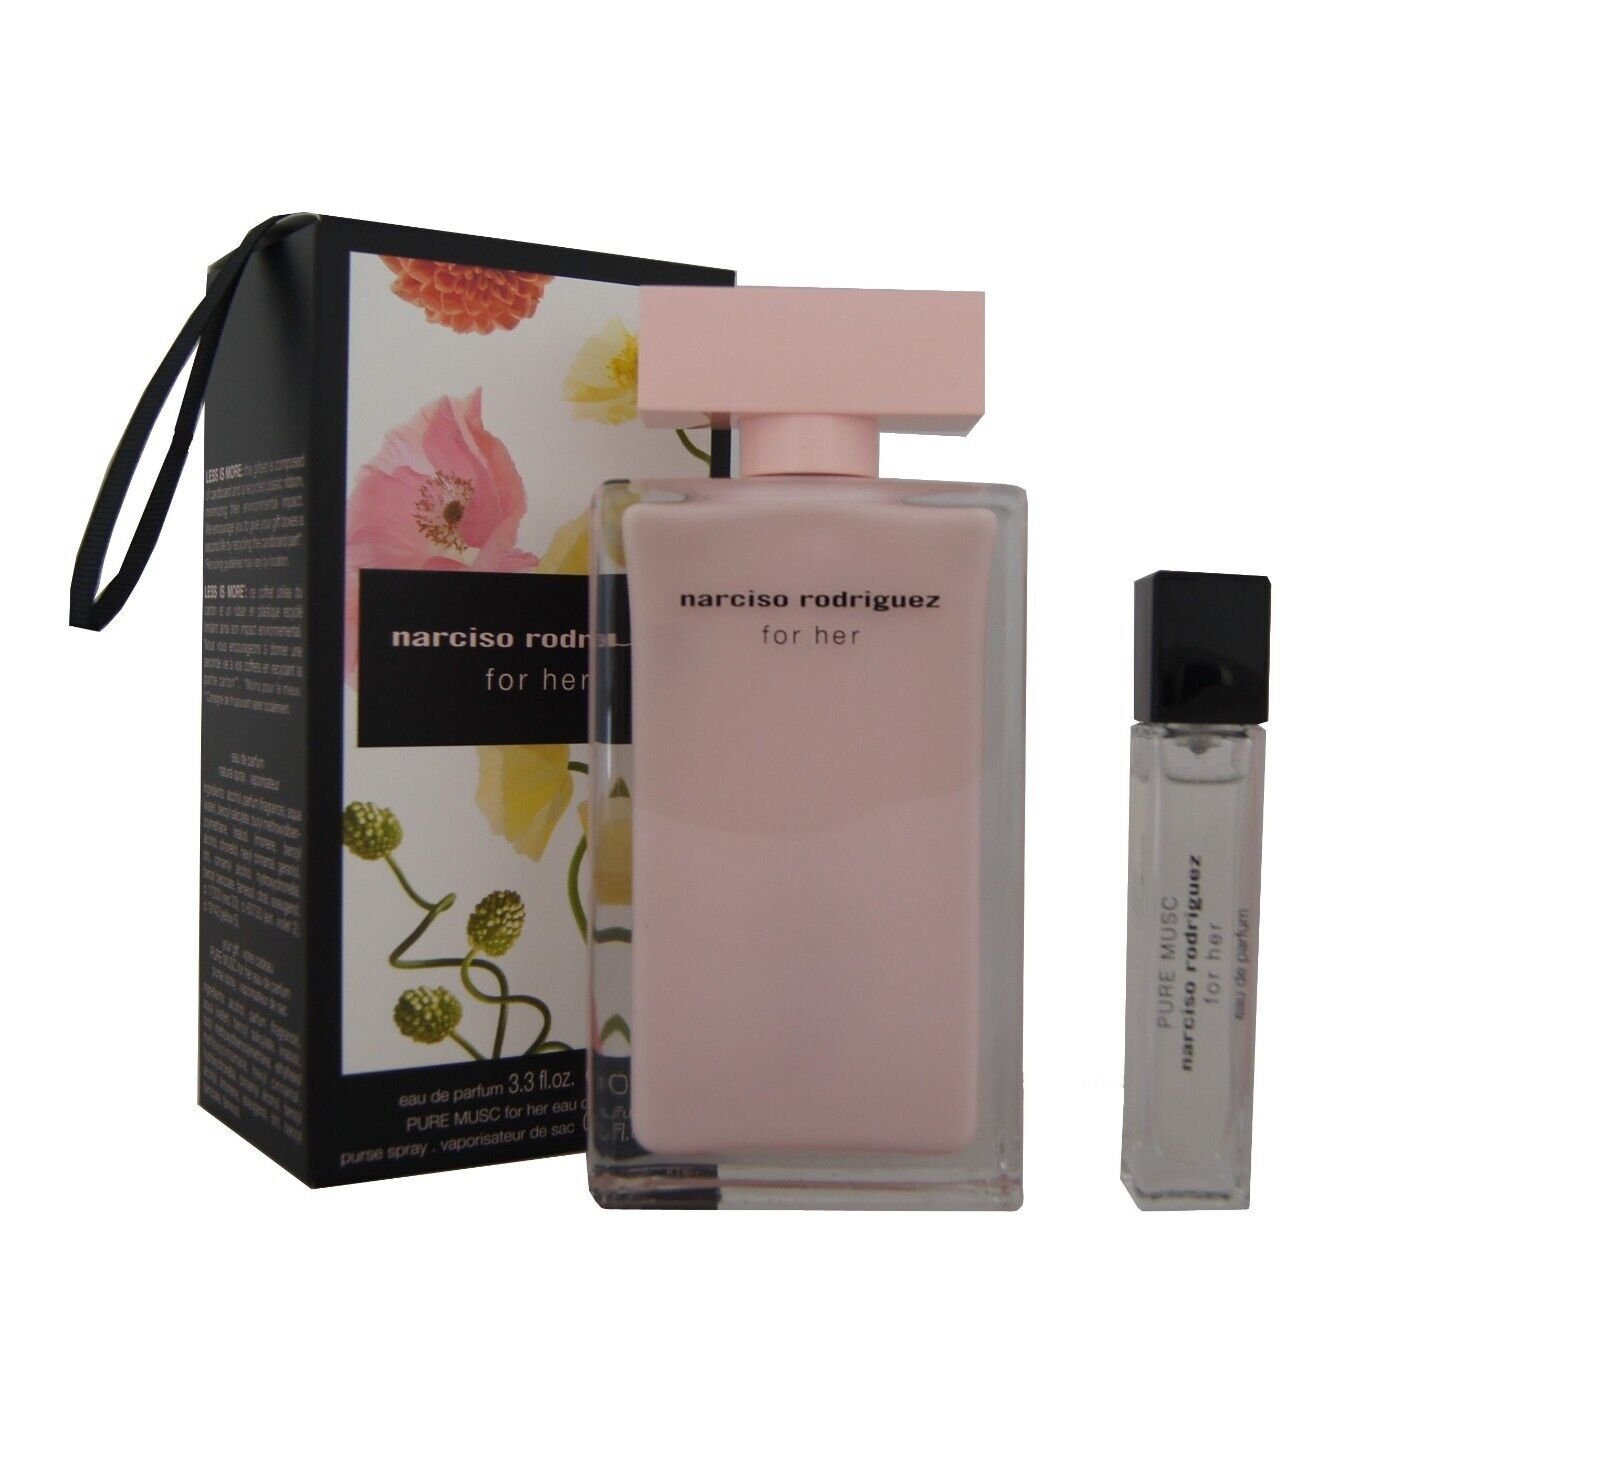 Narcisco Rodriguez Musc 10ml, For narciso EDP Her rodriguez 1-tlg. Pure Duft-Set + EDP Her For 100ml